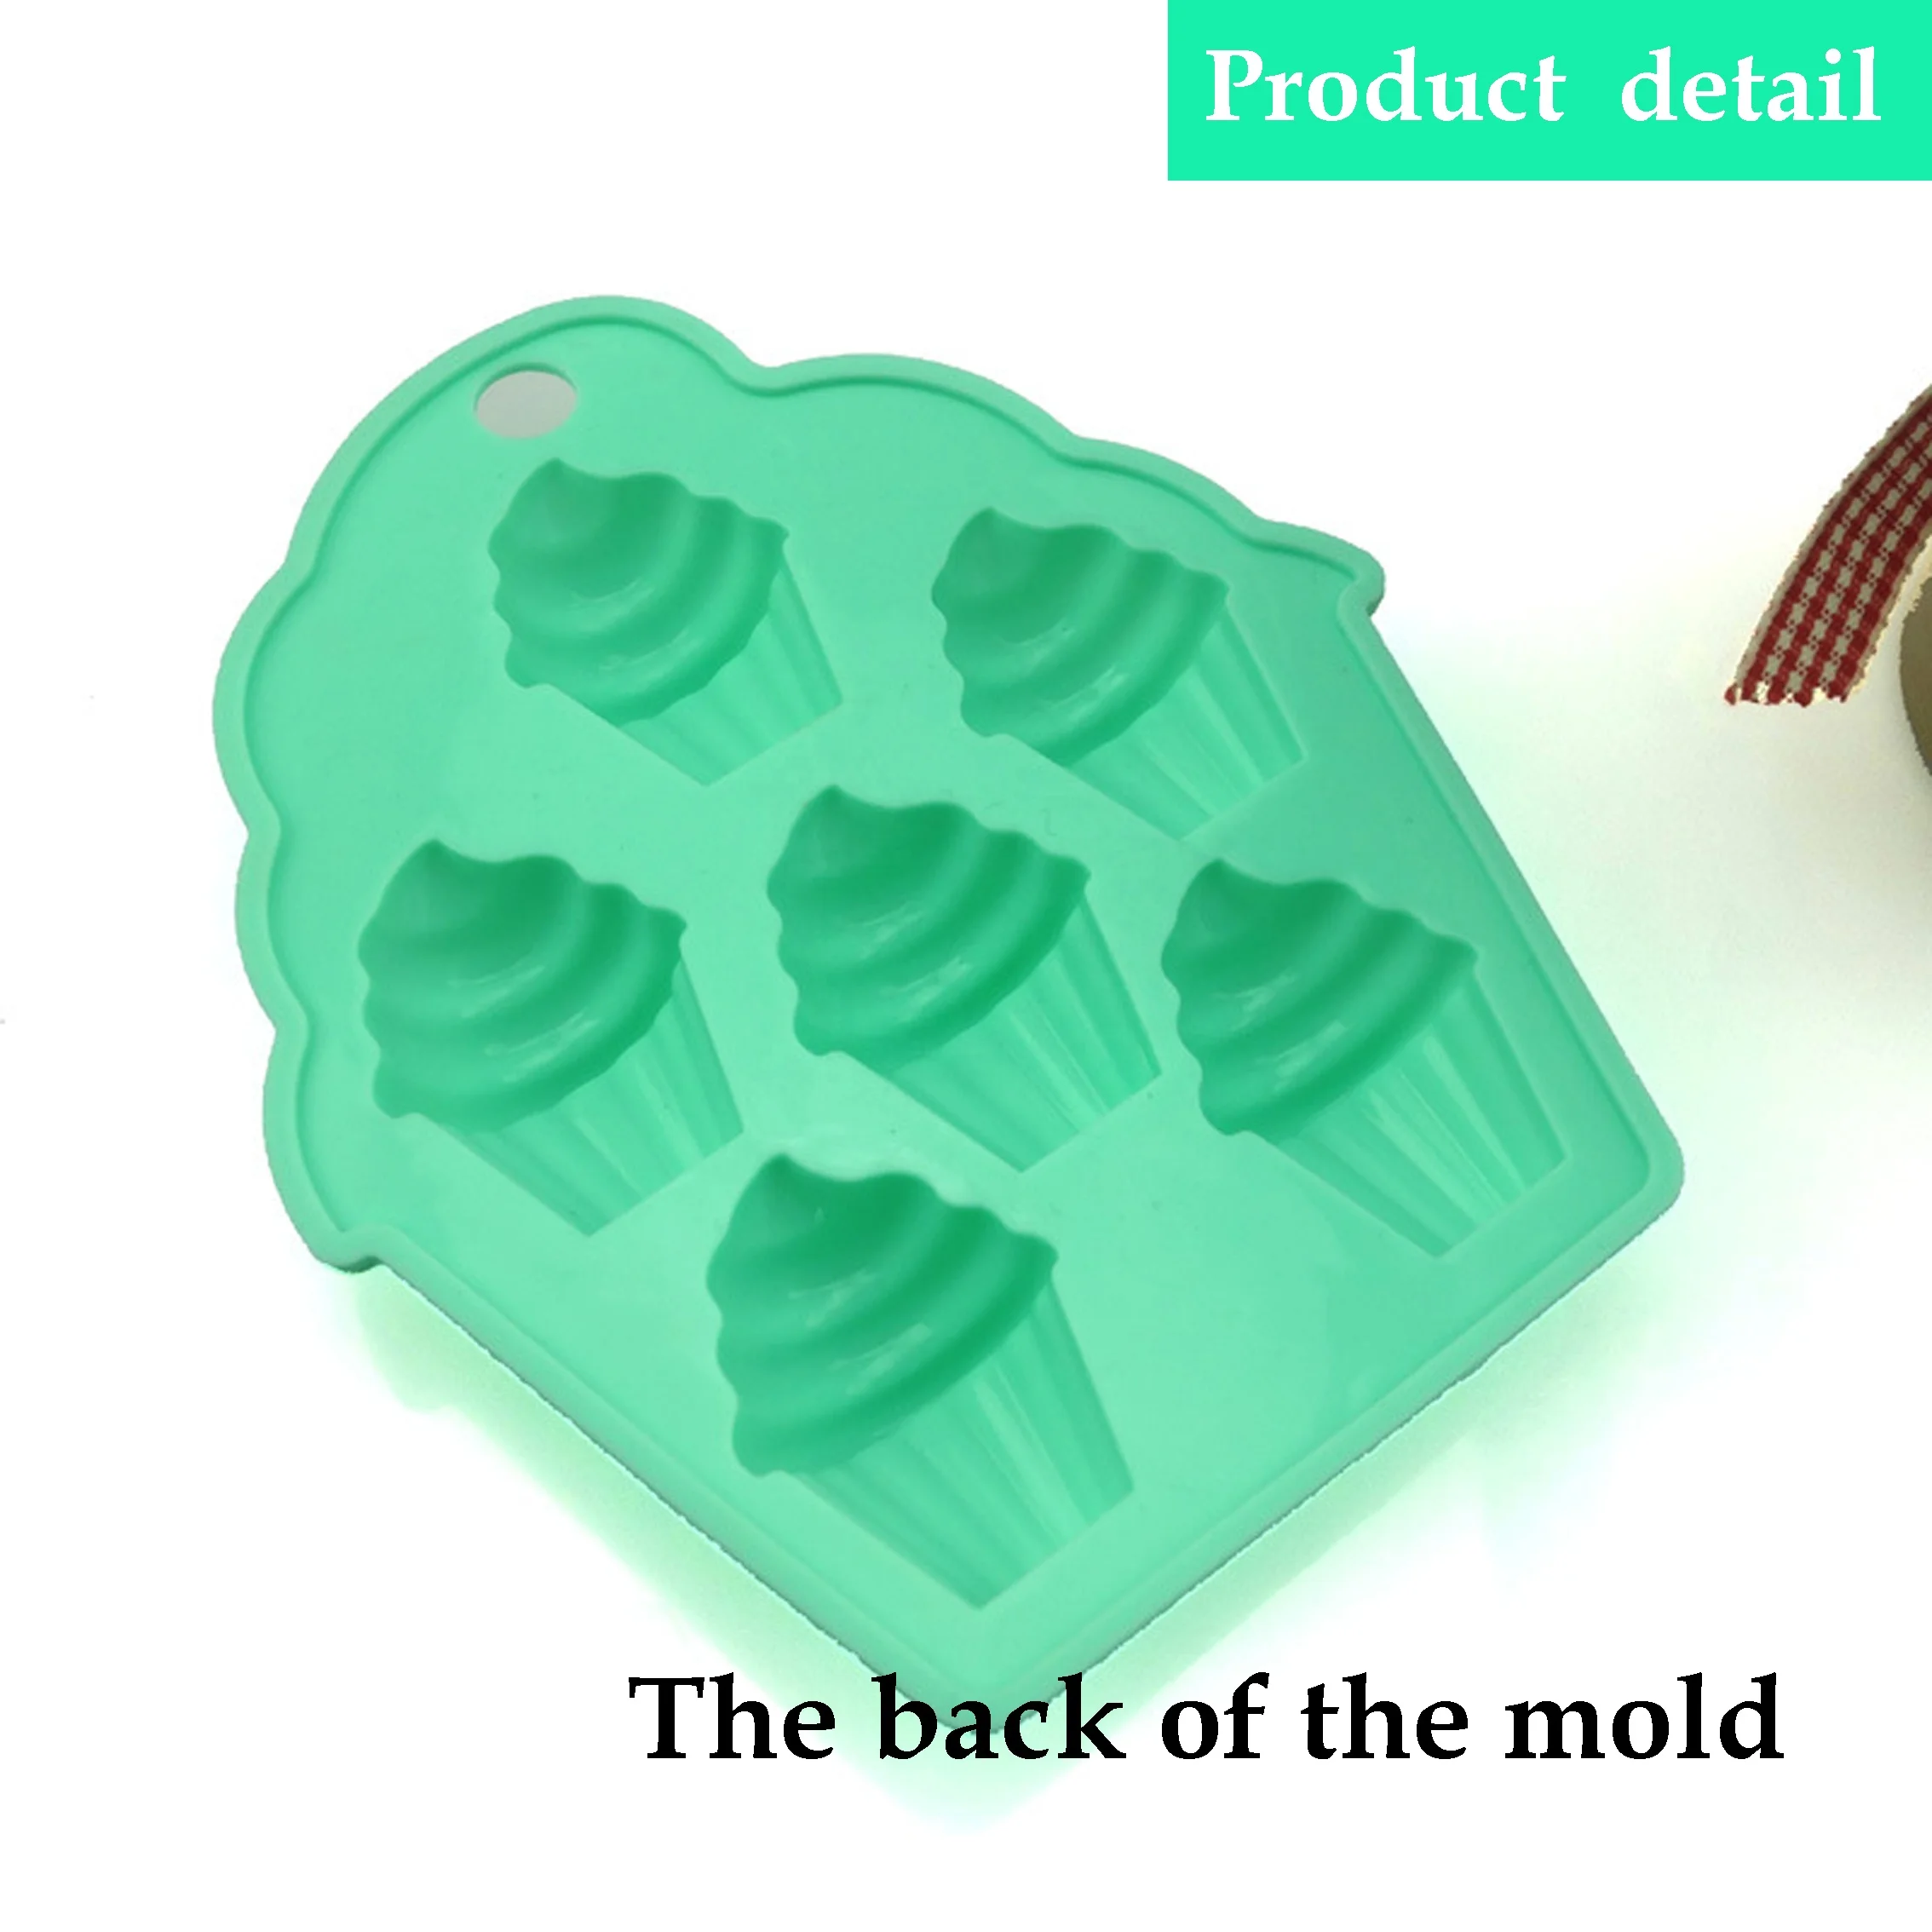 pudding chocolate ice cube mold silicone ice-cream cone shaped soap molds silicone cake molds macallan ice ball maker